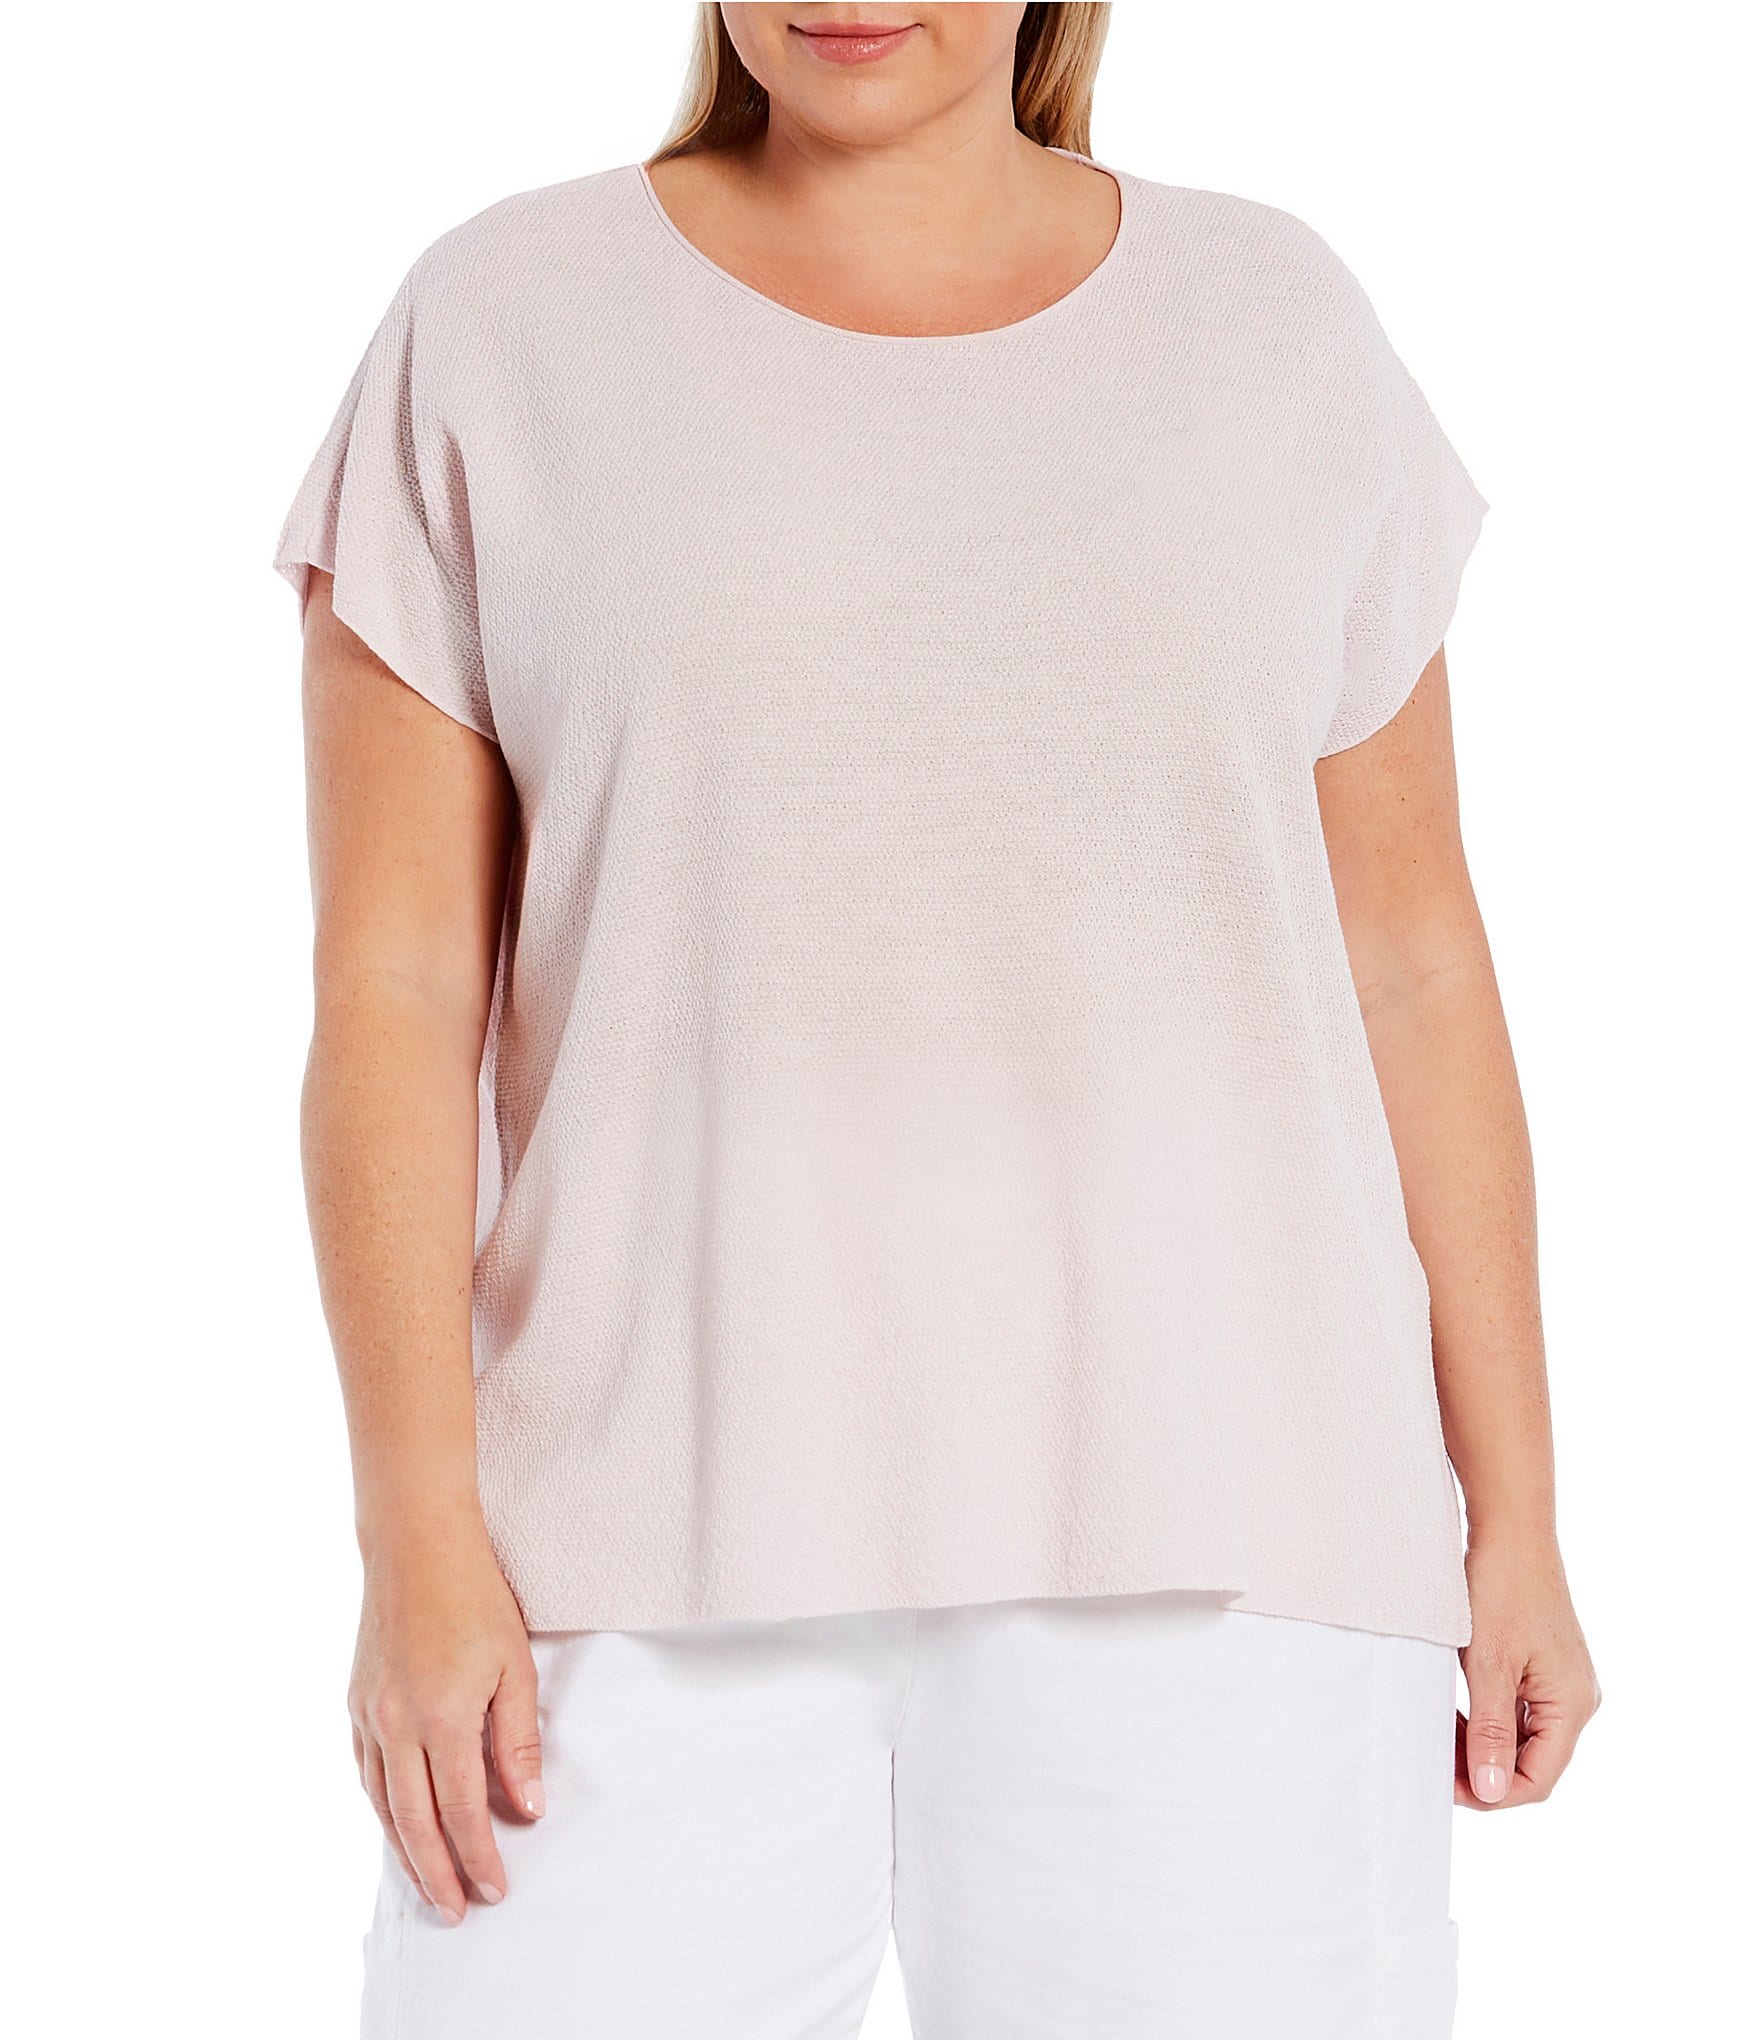 Buy Eileen Fisher Washable Wool Crepe Crewneck Tank Top - Red Cedar At 30%  Off